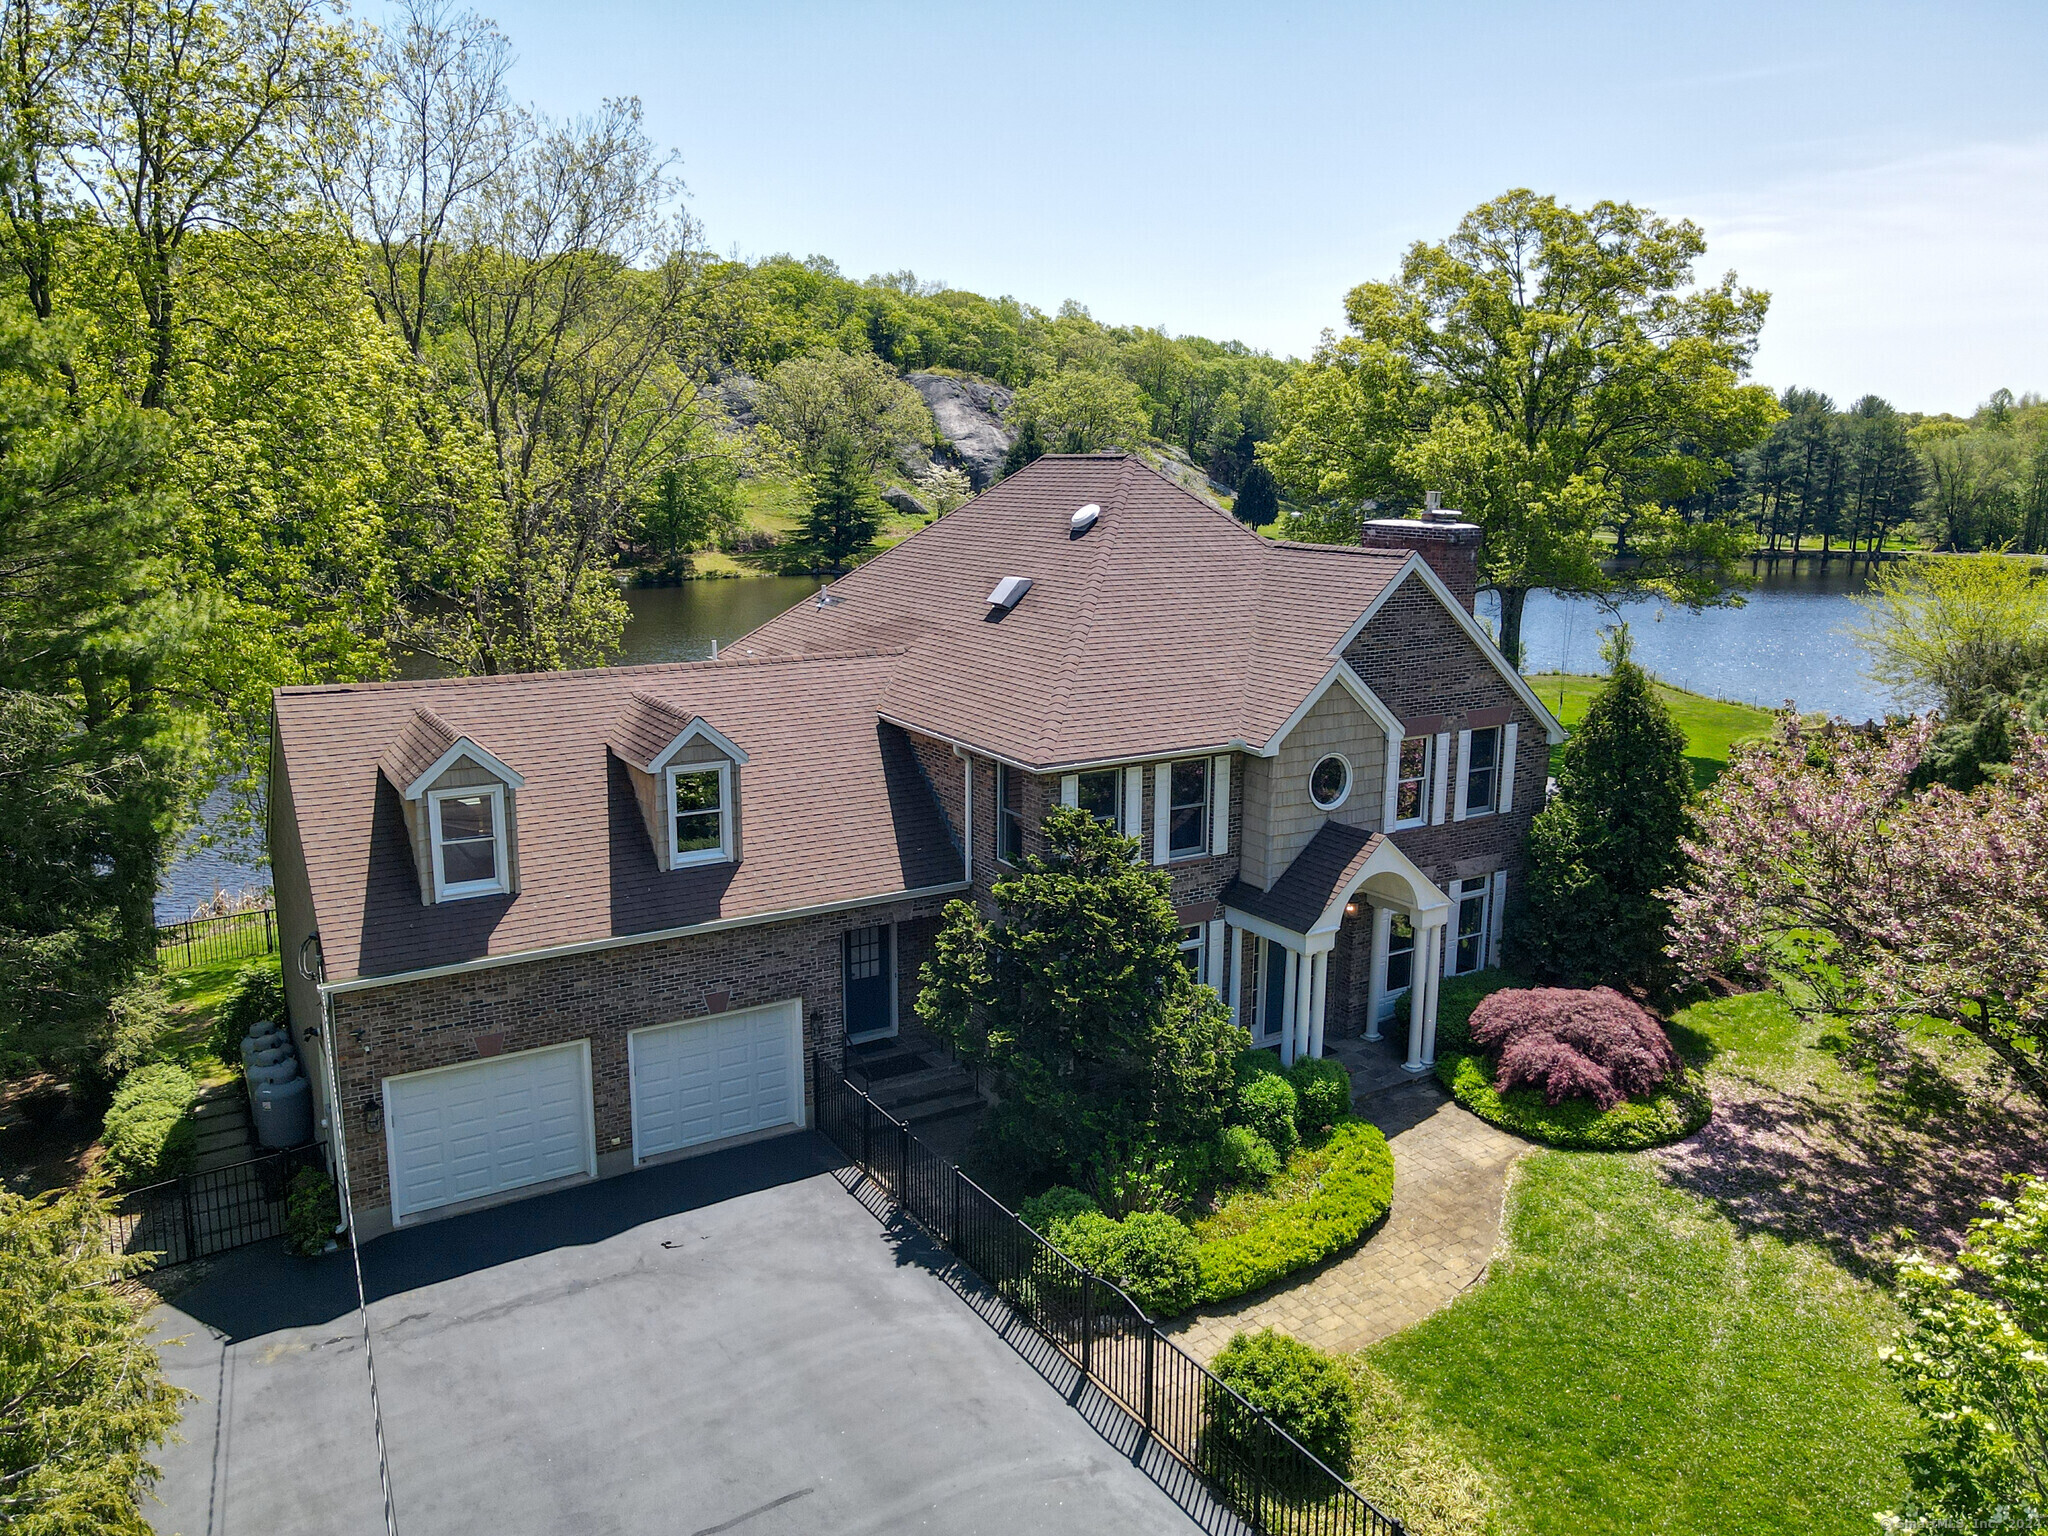 953 Hoop Pole Road, Guilford, Connecticut - 4 Bedrooms  
6 Bathrooms  
11 Rooms - 